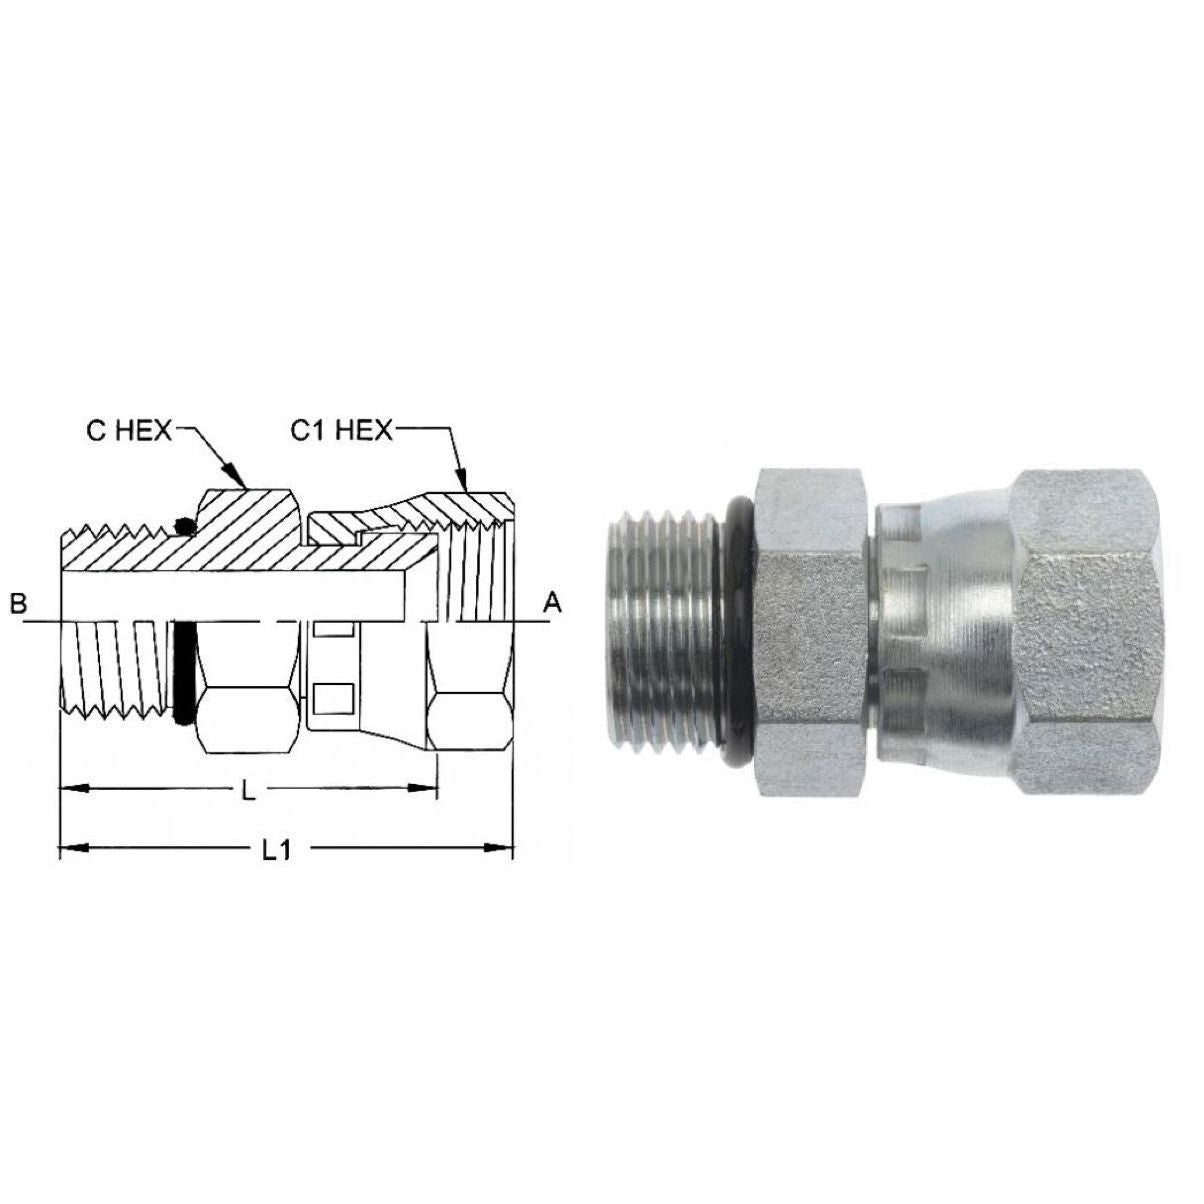 6402-12-12-O-SS : OneHydraulics Straight Adapter, 0.75 (3/4) Male ORB x 0.75 (3/4) Female JIC Swivel, Stainless Steel, 5000psi